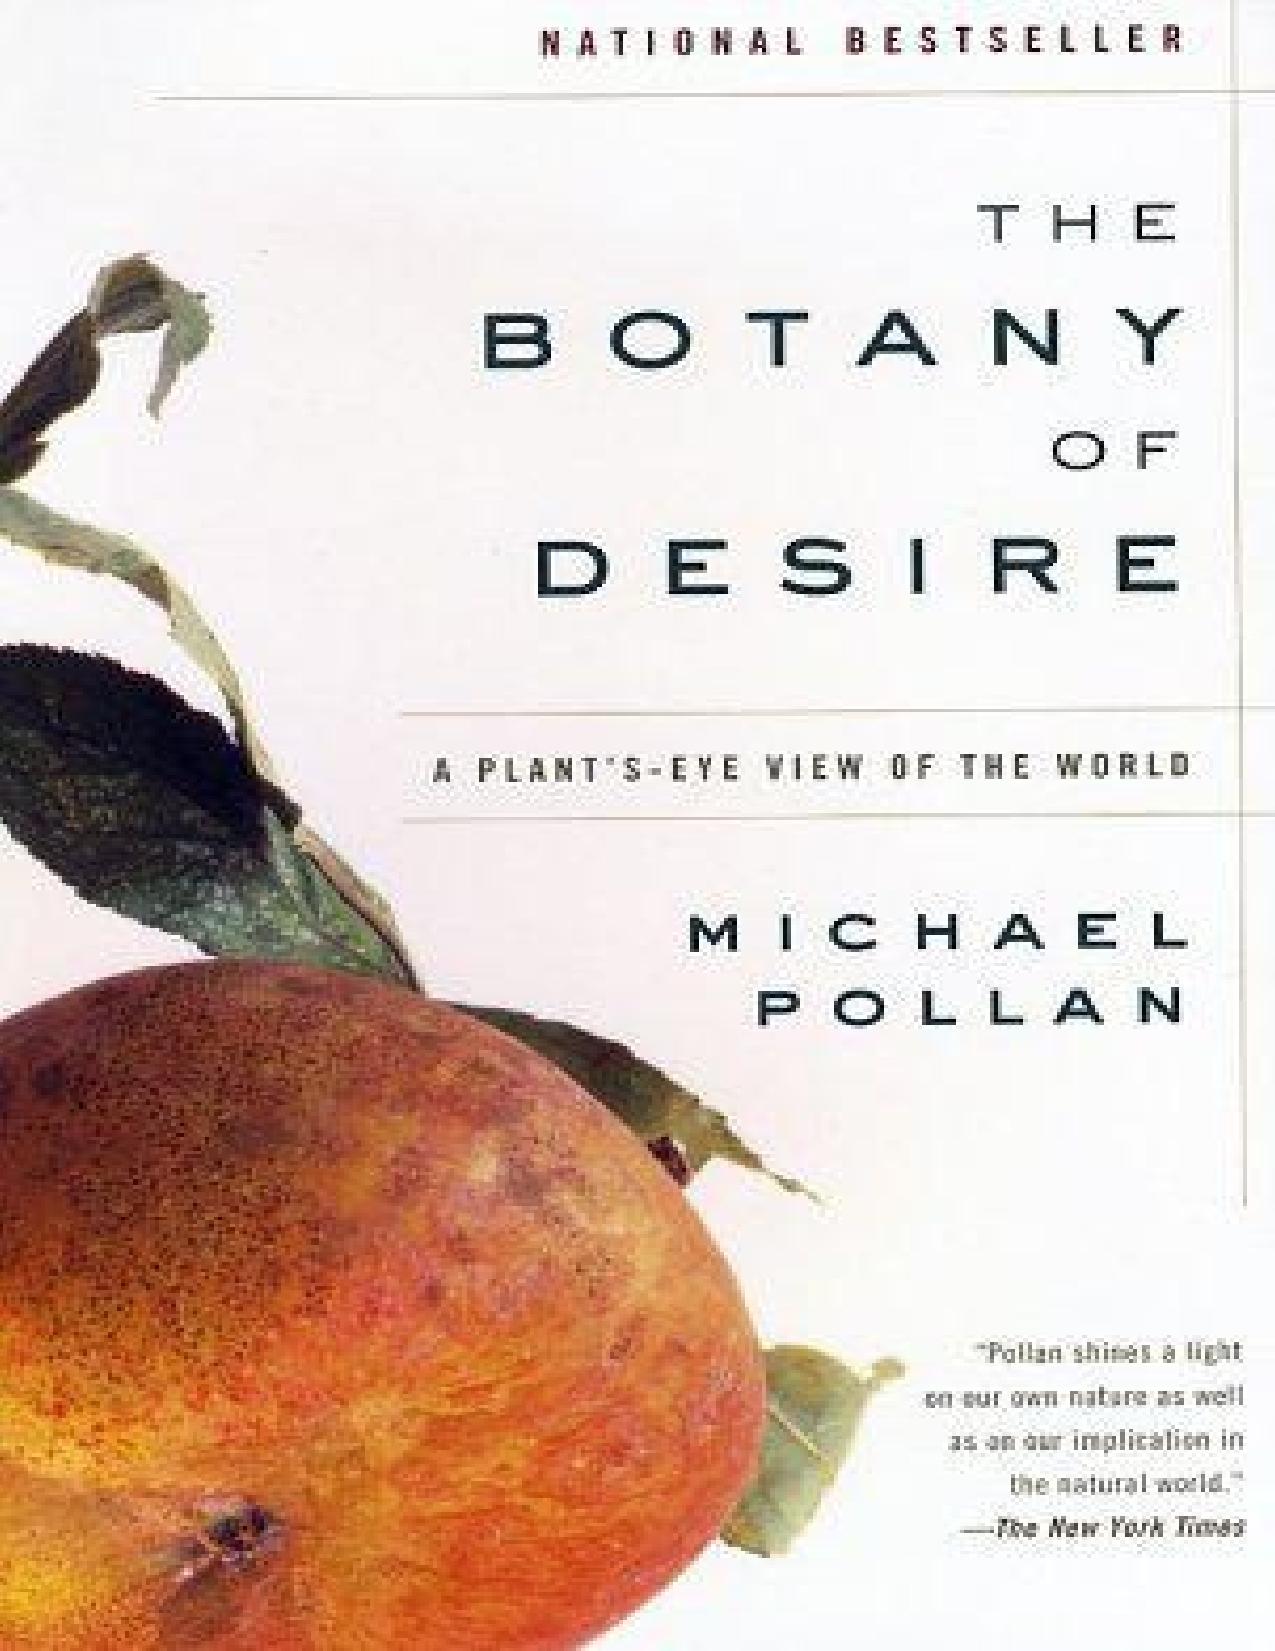 The Botany of Desire: A Plant\'s-Eye View of the World - PDFDrive.com